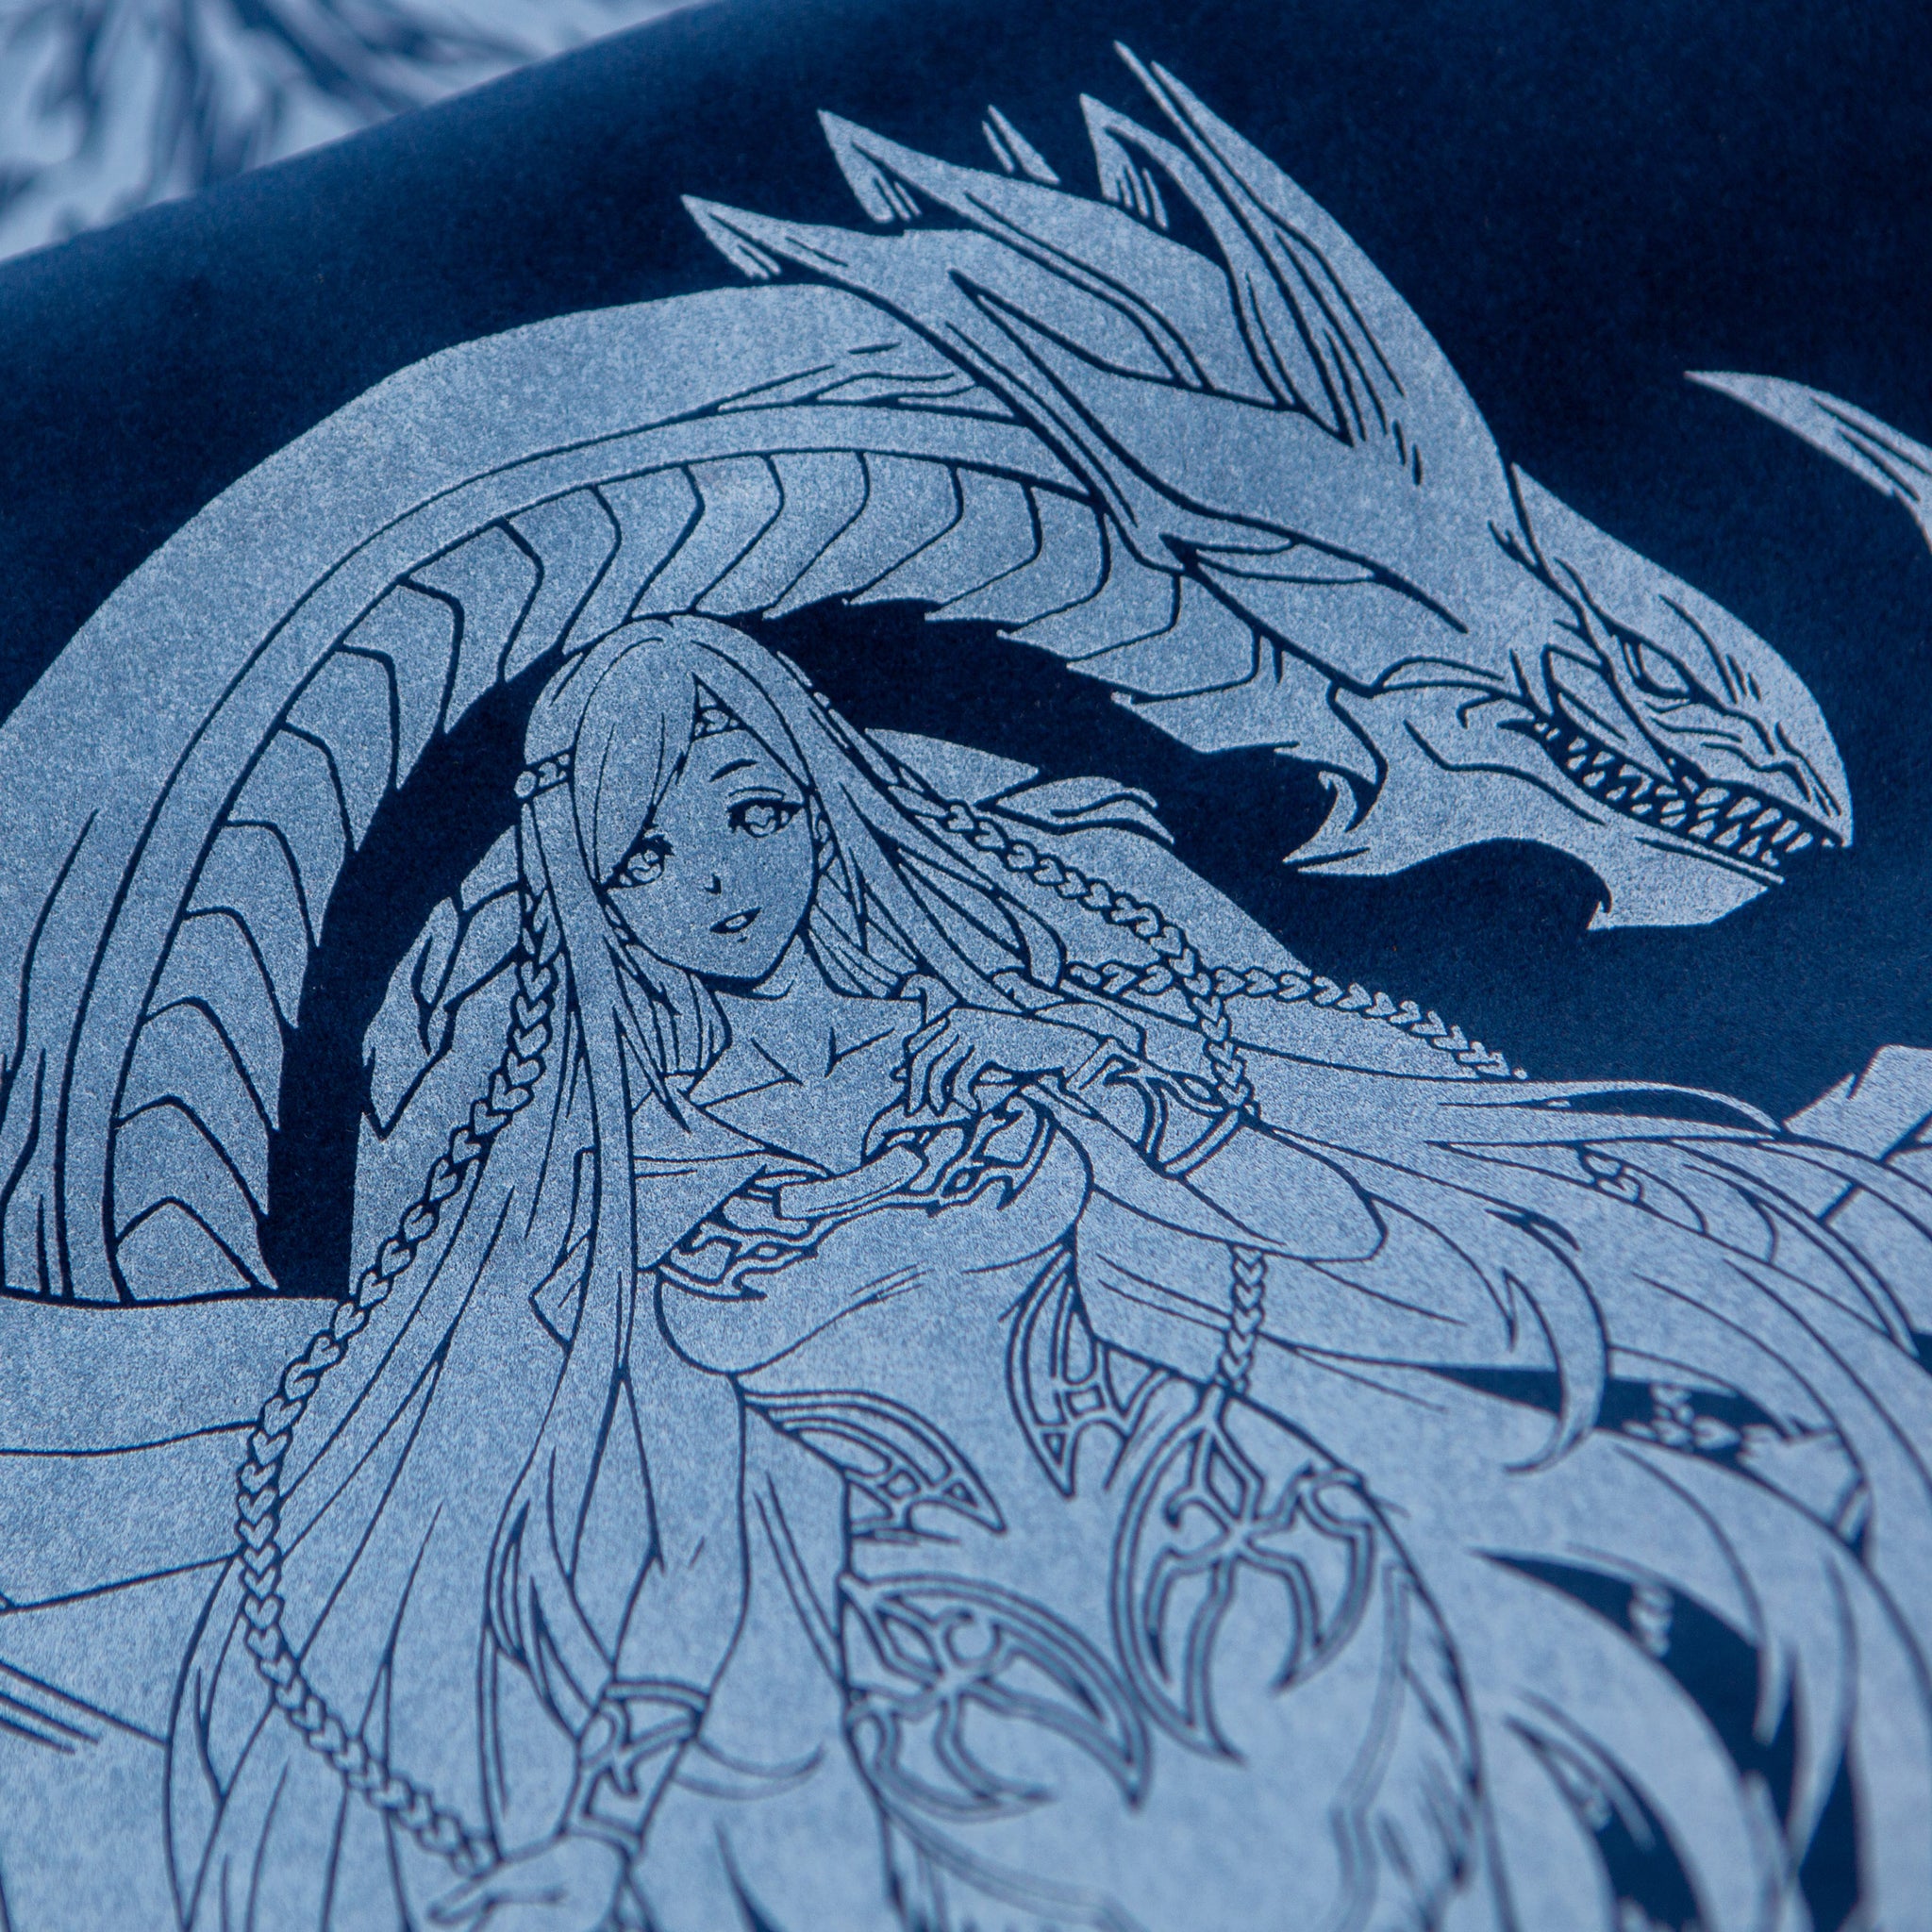 The Dragon's Maiden | PROTOTYPE | LE Suede Royal x Powder Blue x All-black stitching